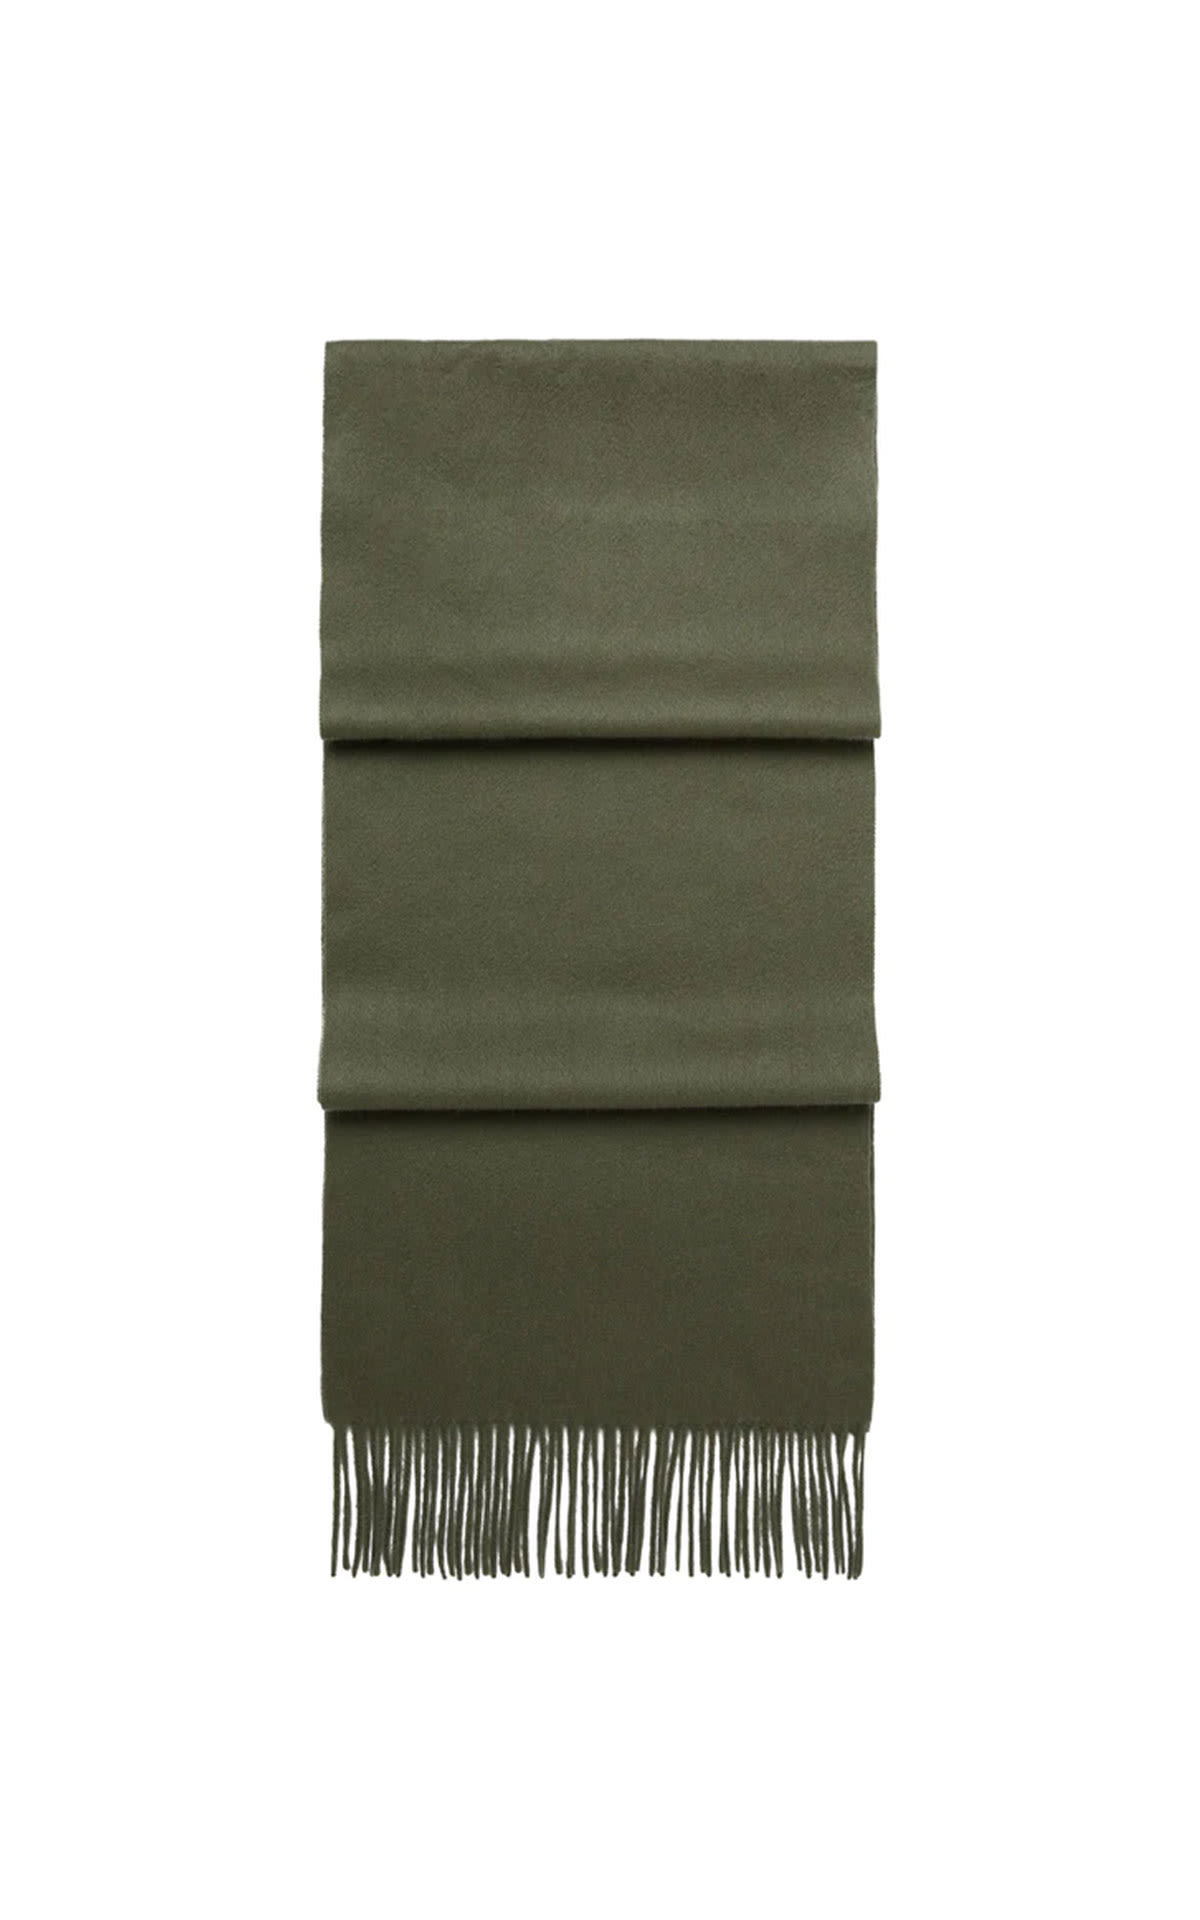 N.Peal Small woven cashmere scarf dark olive green from Bicester Village